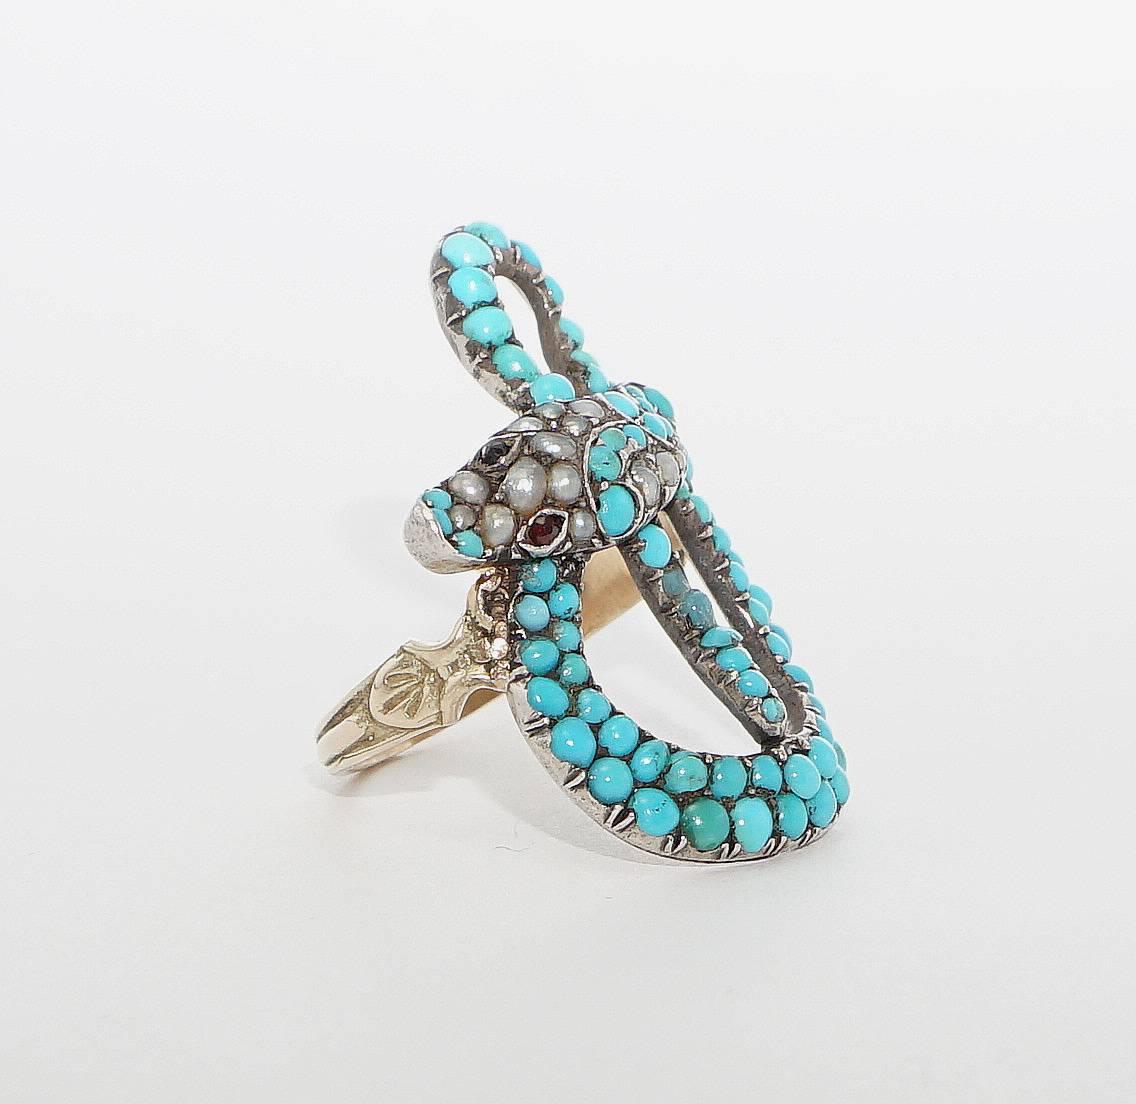 Beacon Hill Jewelers Presents:

A truly exceptional snake form ring in yellow gold. Set throughout with turquoise, pearls, and with rubies for the eyes this fantastic snake ring features the incredibly detailed body of snake affixed to a